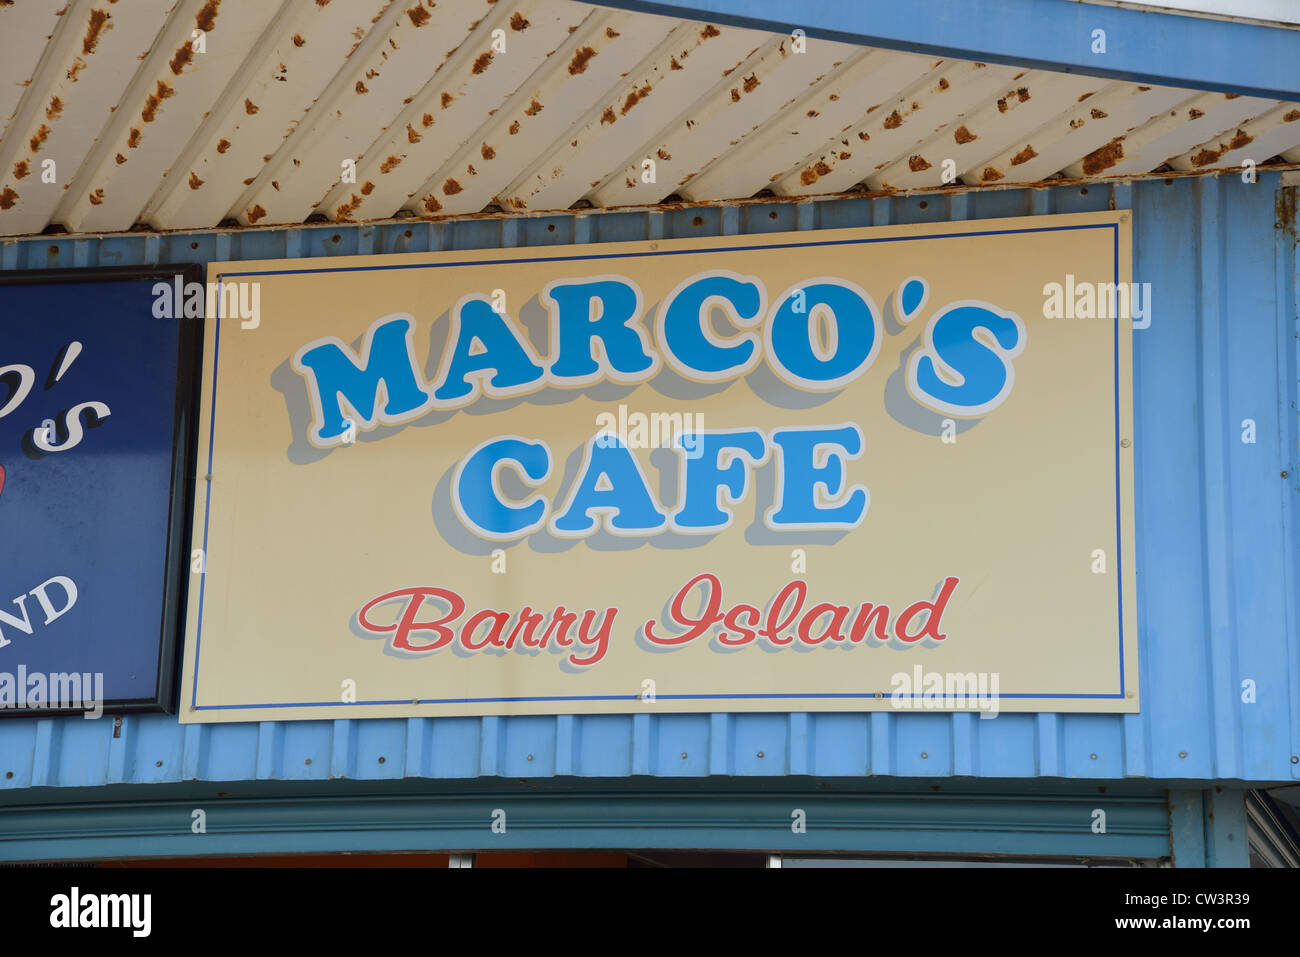 Marco's Cafe ( featured in 'Gavin & Stacey' sitcom ), Barry Island, Barry, Vale of Glamorgan, Wales, Regno Unito Foto Stock